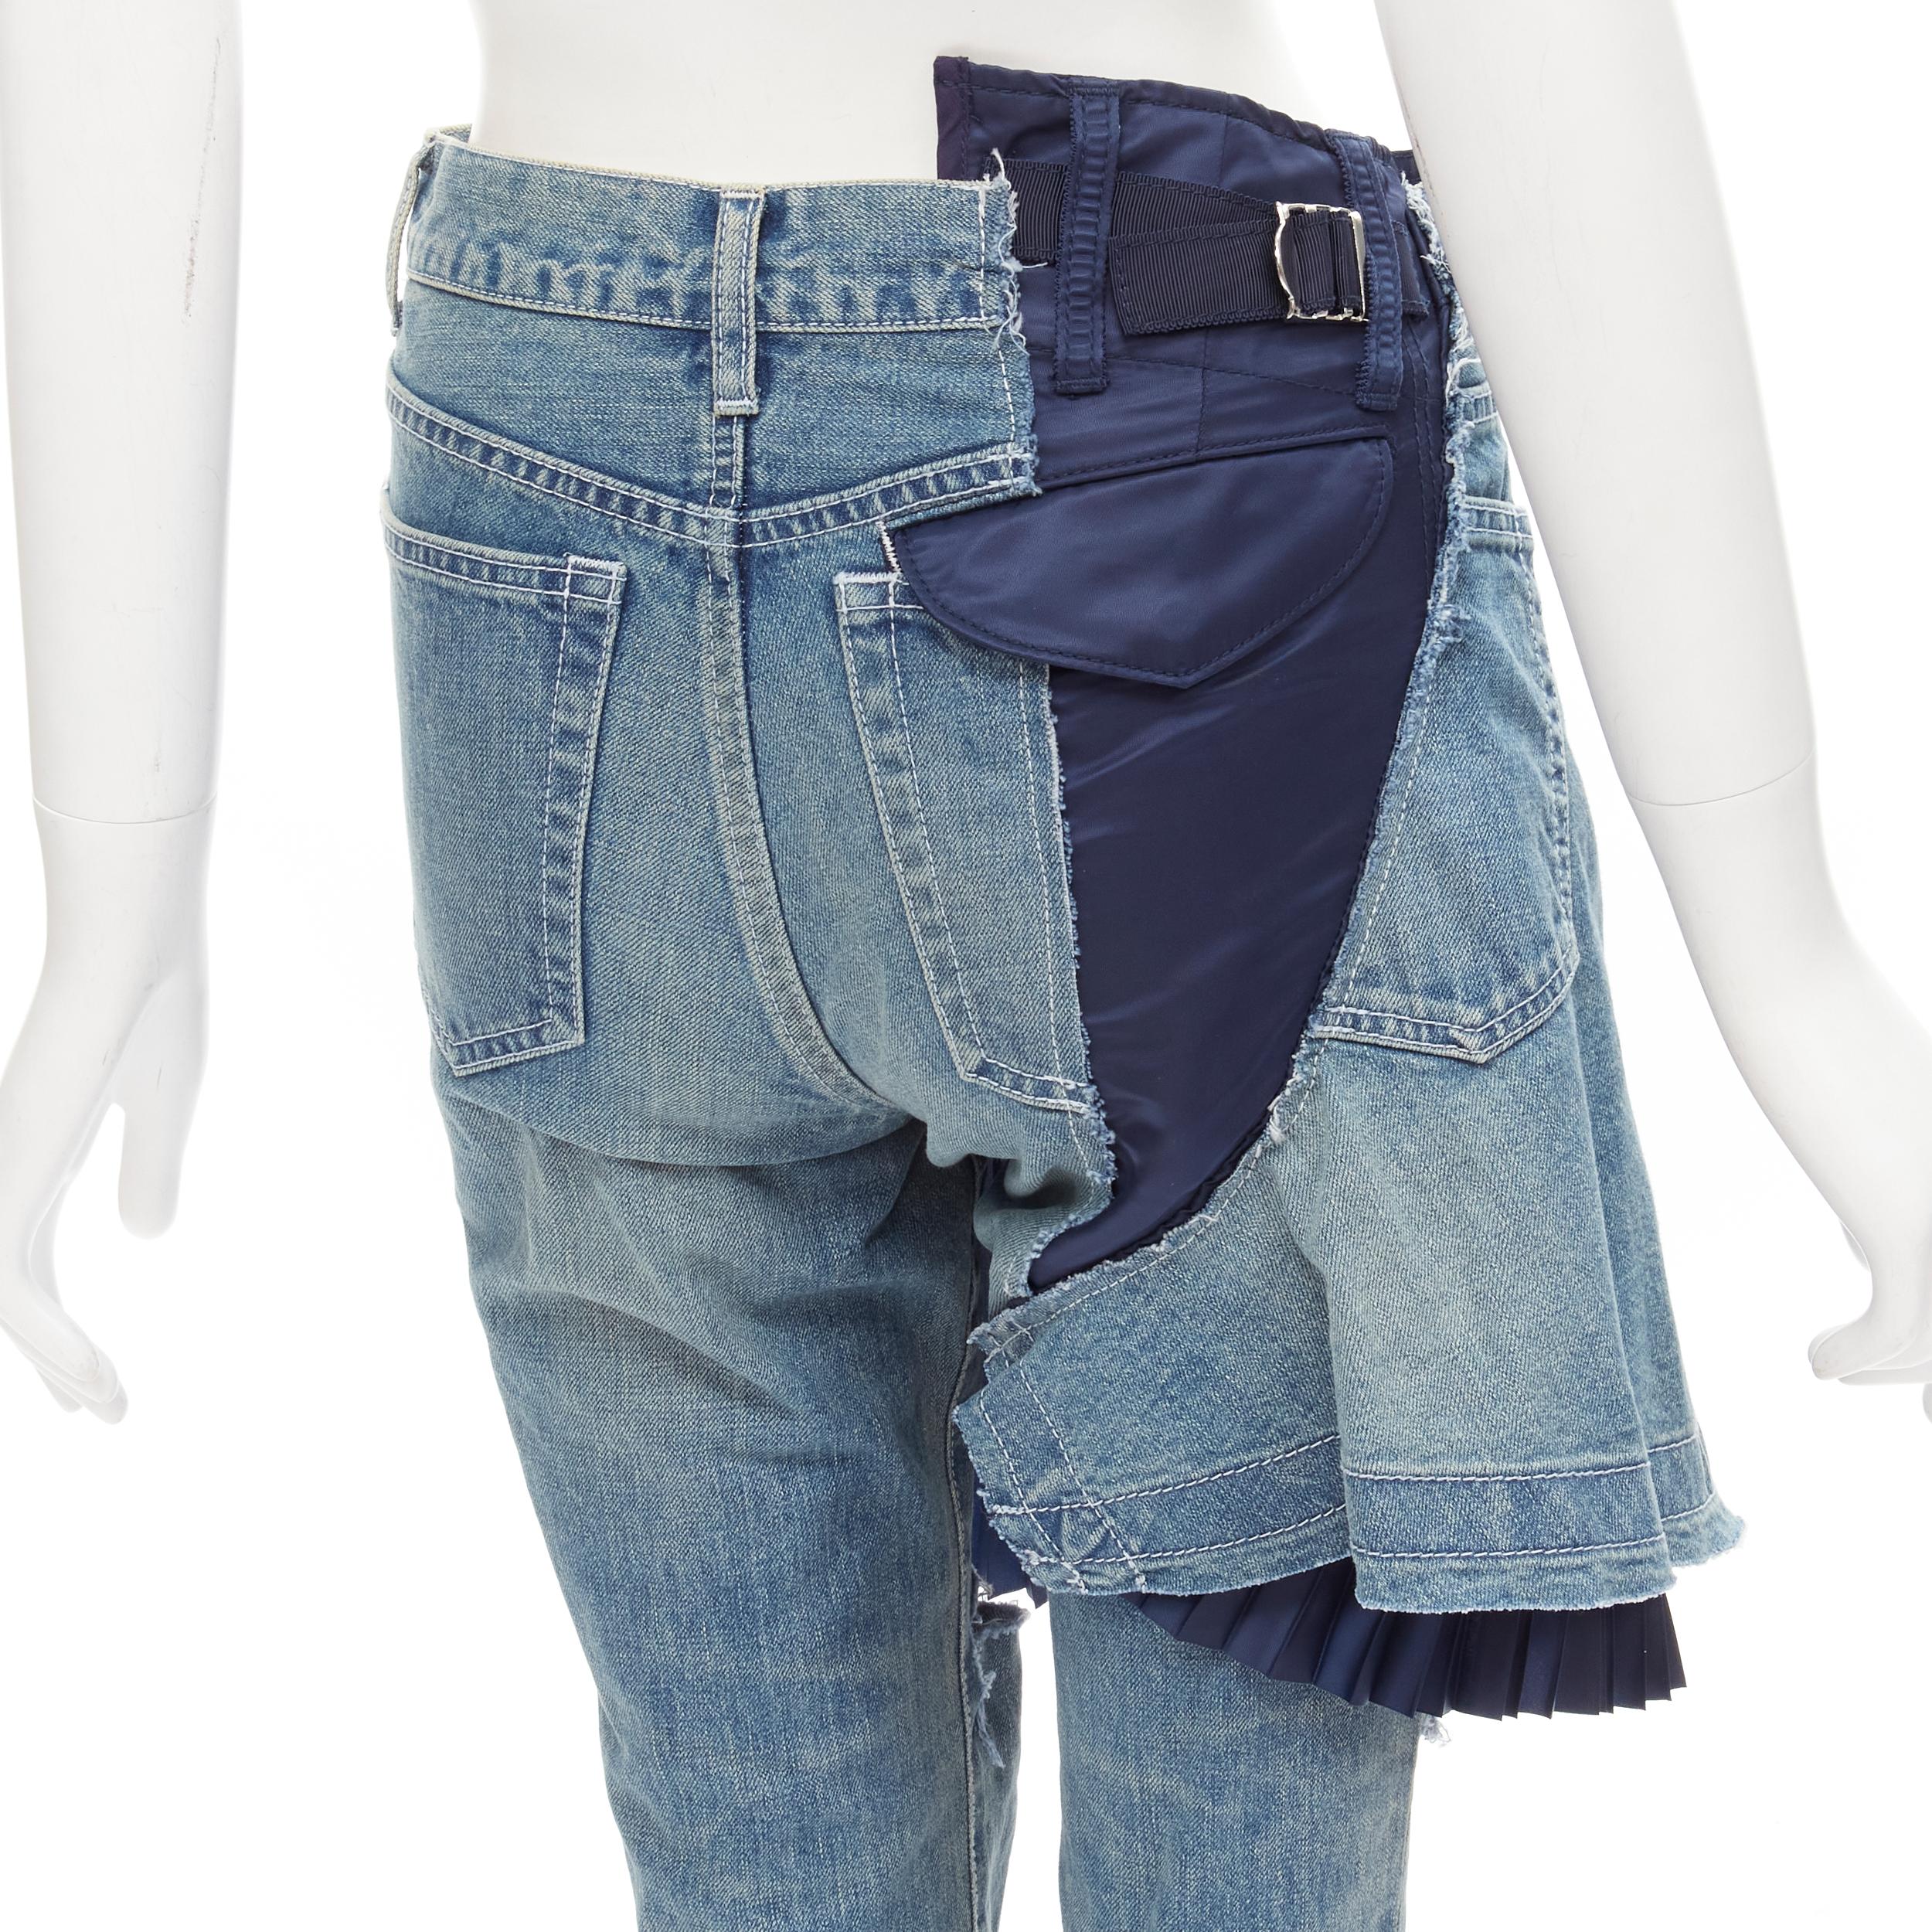 SACAI deconstructed denim pleated wrap skirt layered ripped jeans XS
Reference: ANWU/A00815
Brand: Sacai
Designer: Chitose Abe
Material: Denim
Color: Blue, Navy
Pattern: Solid
Closure: Zip
Extra Details: Distressed knee straight cropped jeans with